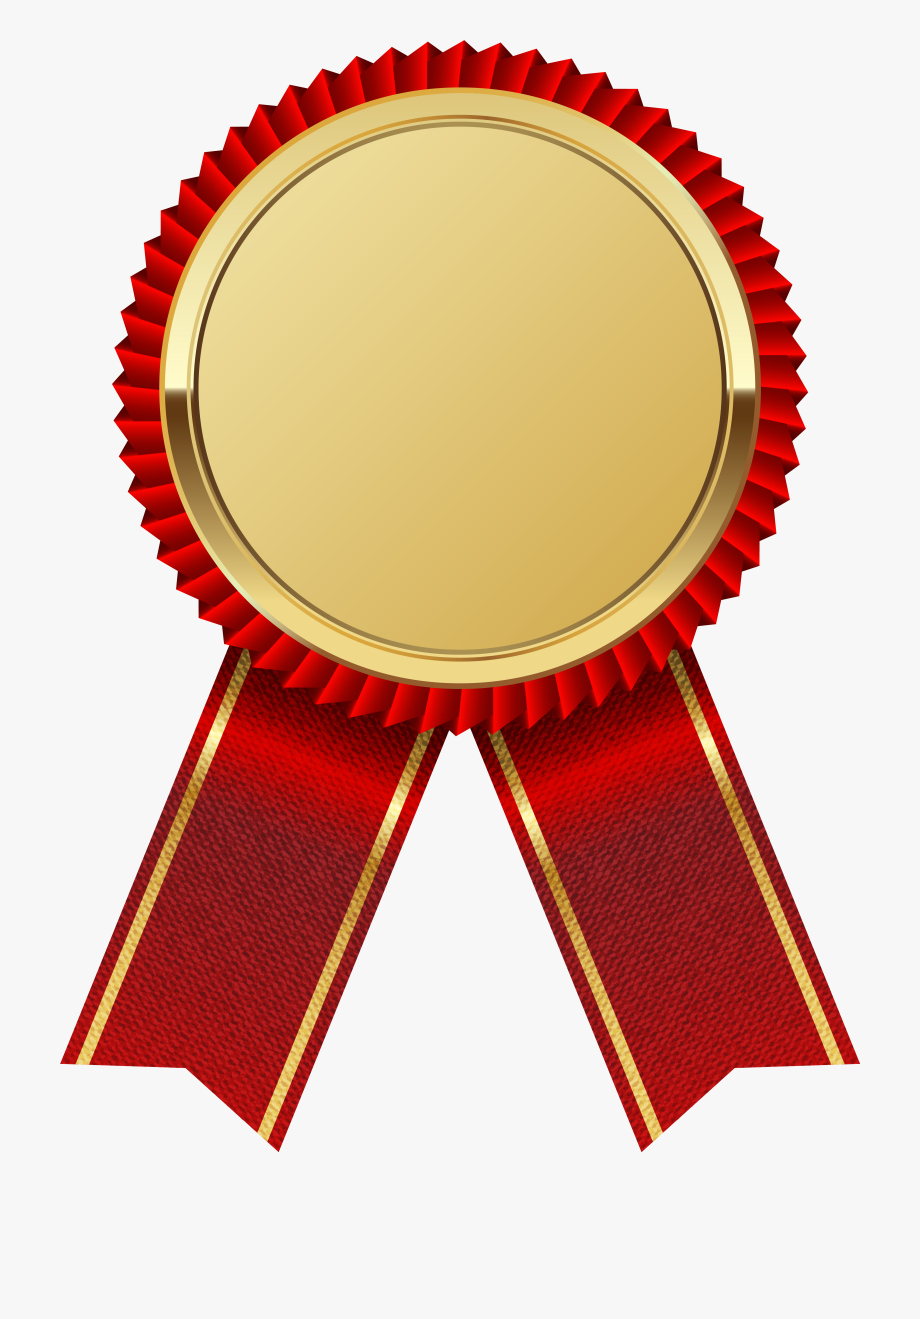 Gold Medal With Red Ribbon Png Clipart Image